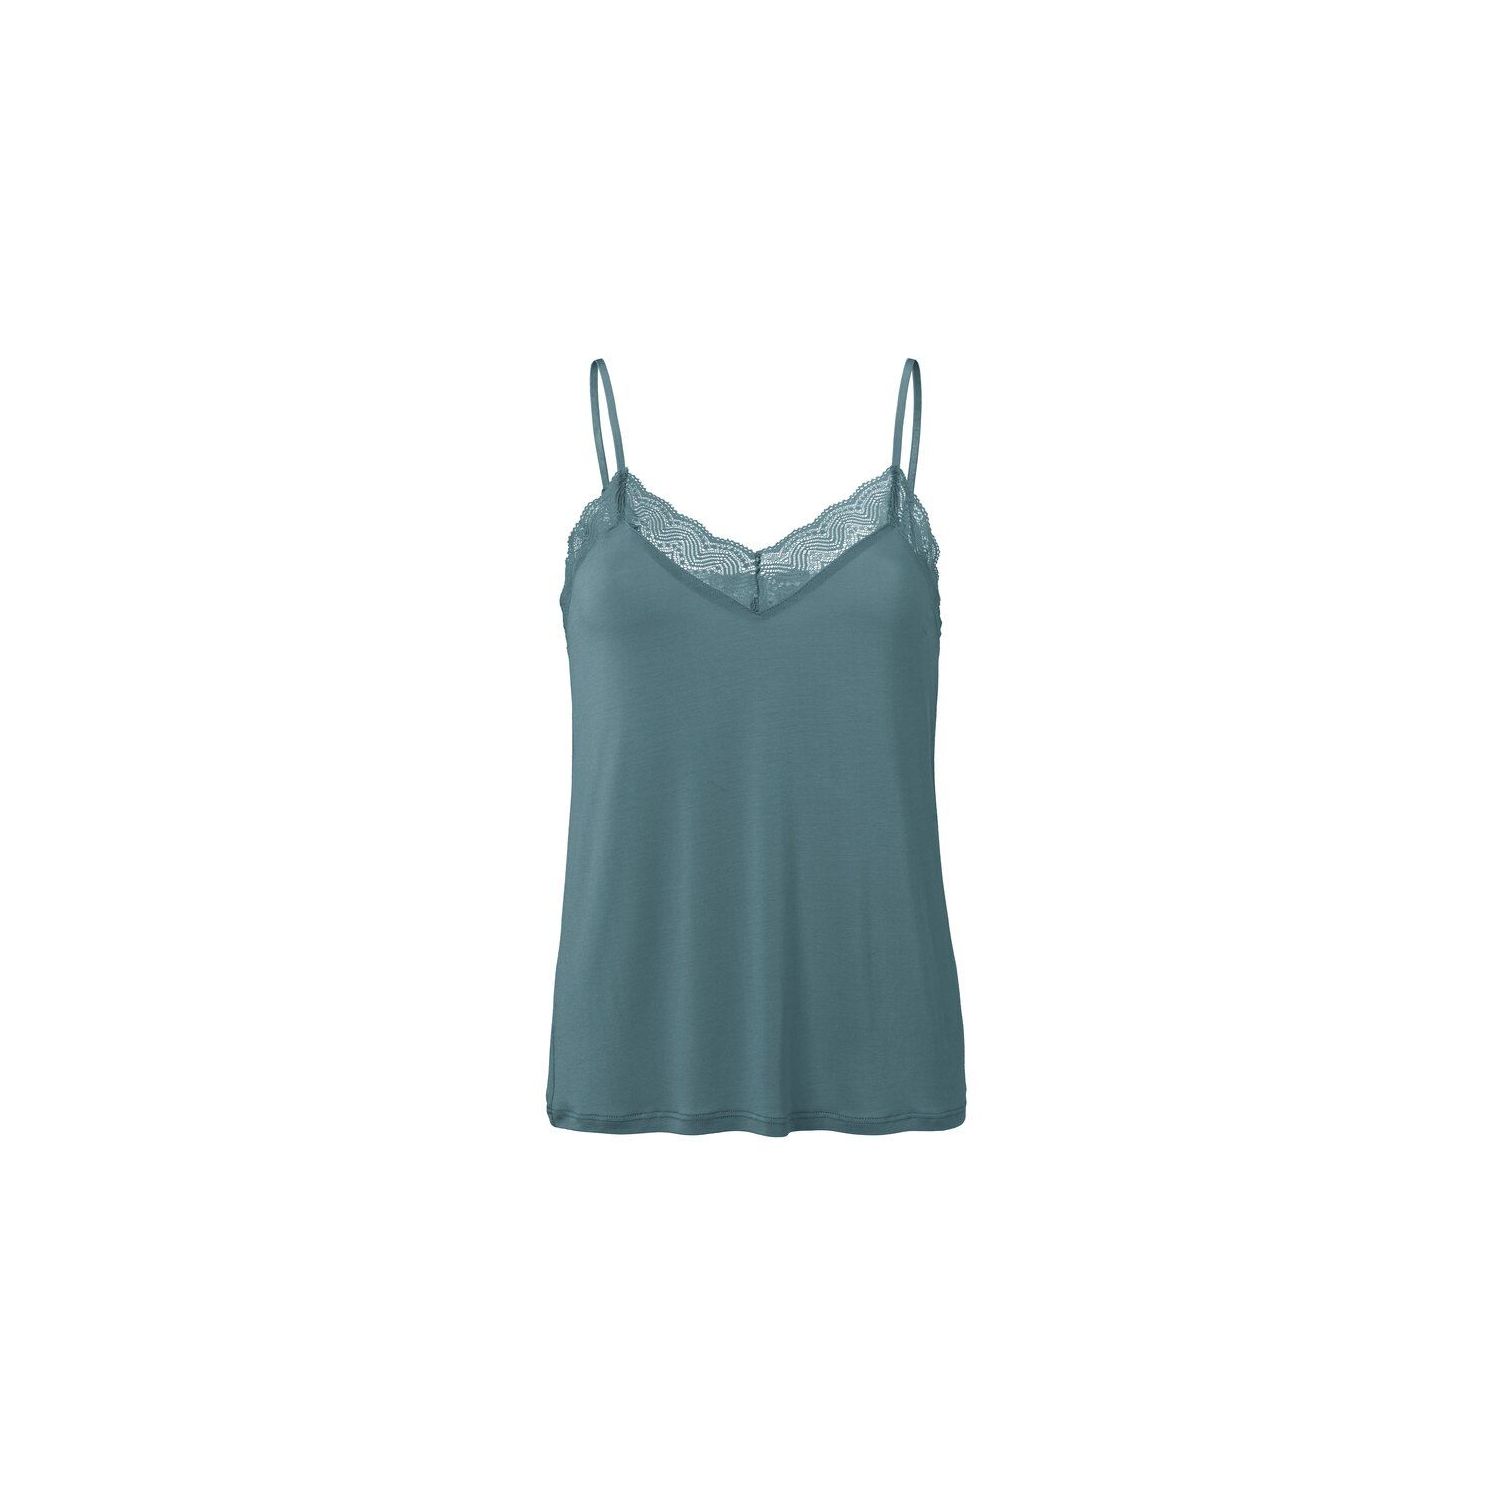 Yaya lace strap top with jersey body stormy blue